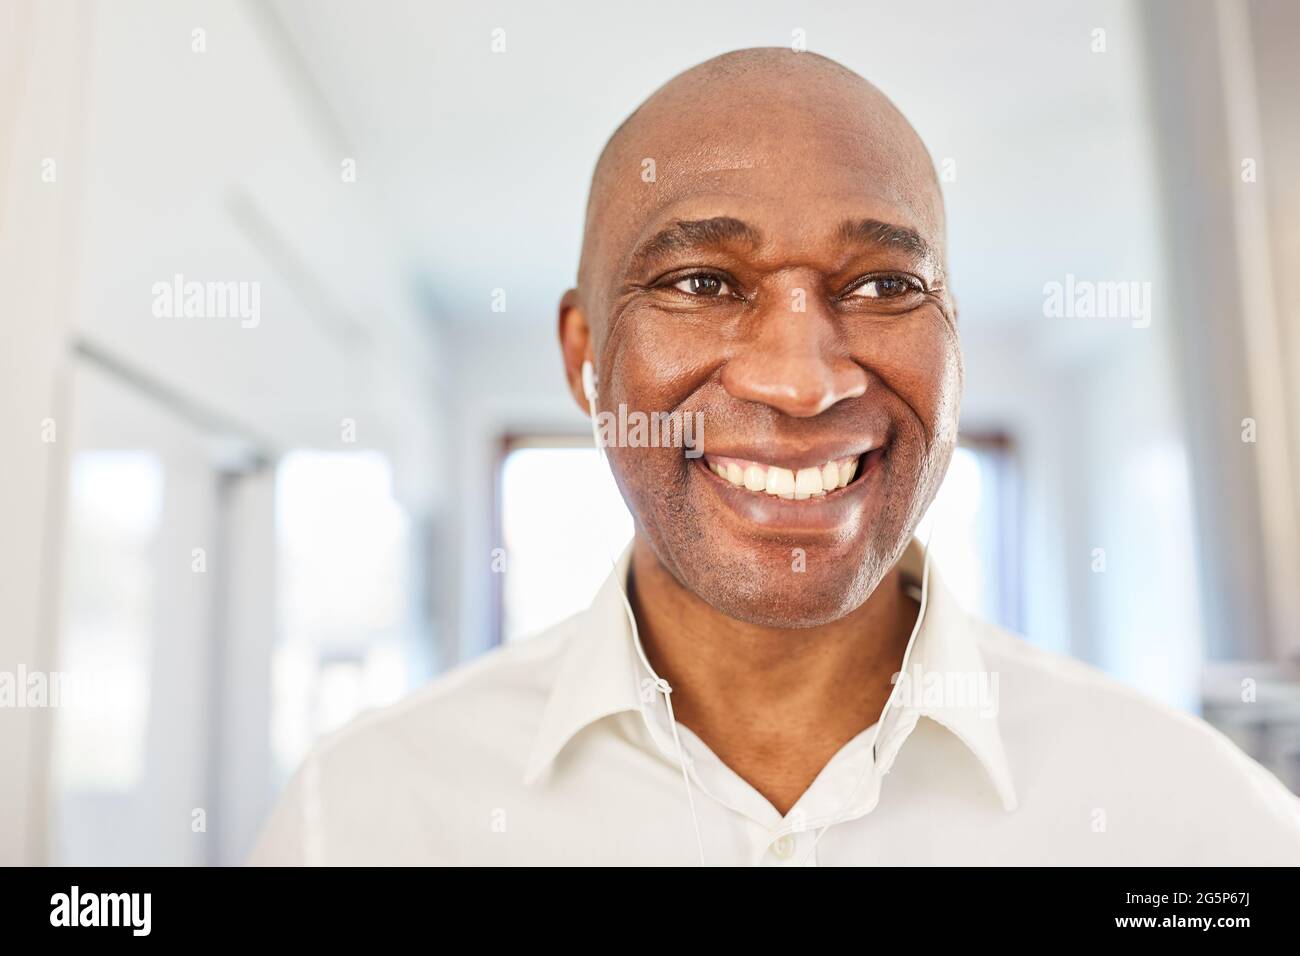 Smiling African Business Man With In-Ear Headphones At Home In The Home Office Stock Photo